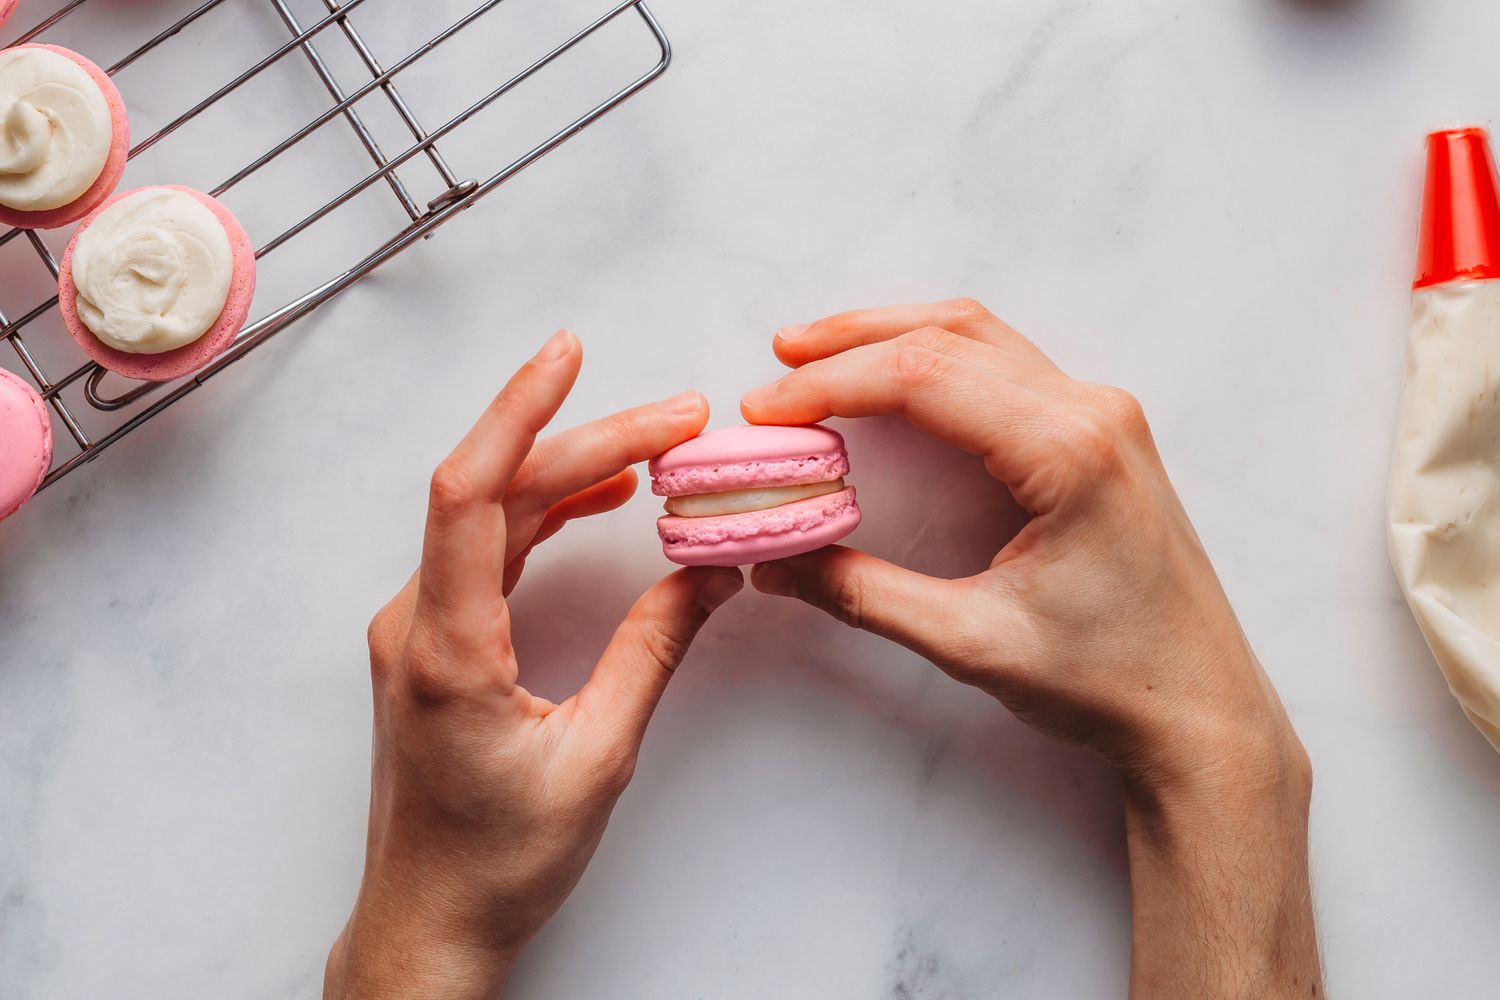 Assembling a filled and unfilled macaron to make s sandwich